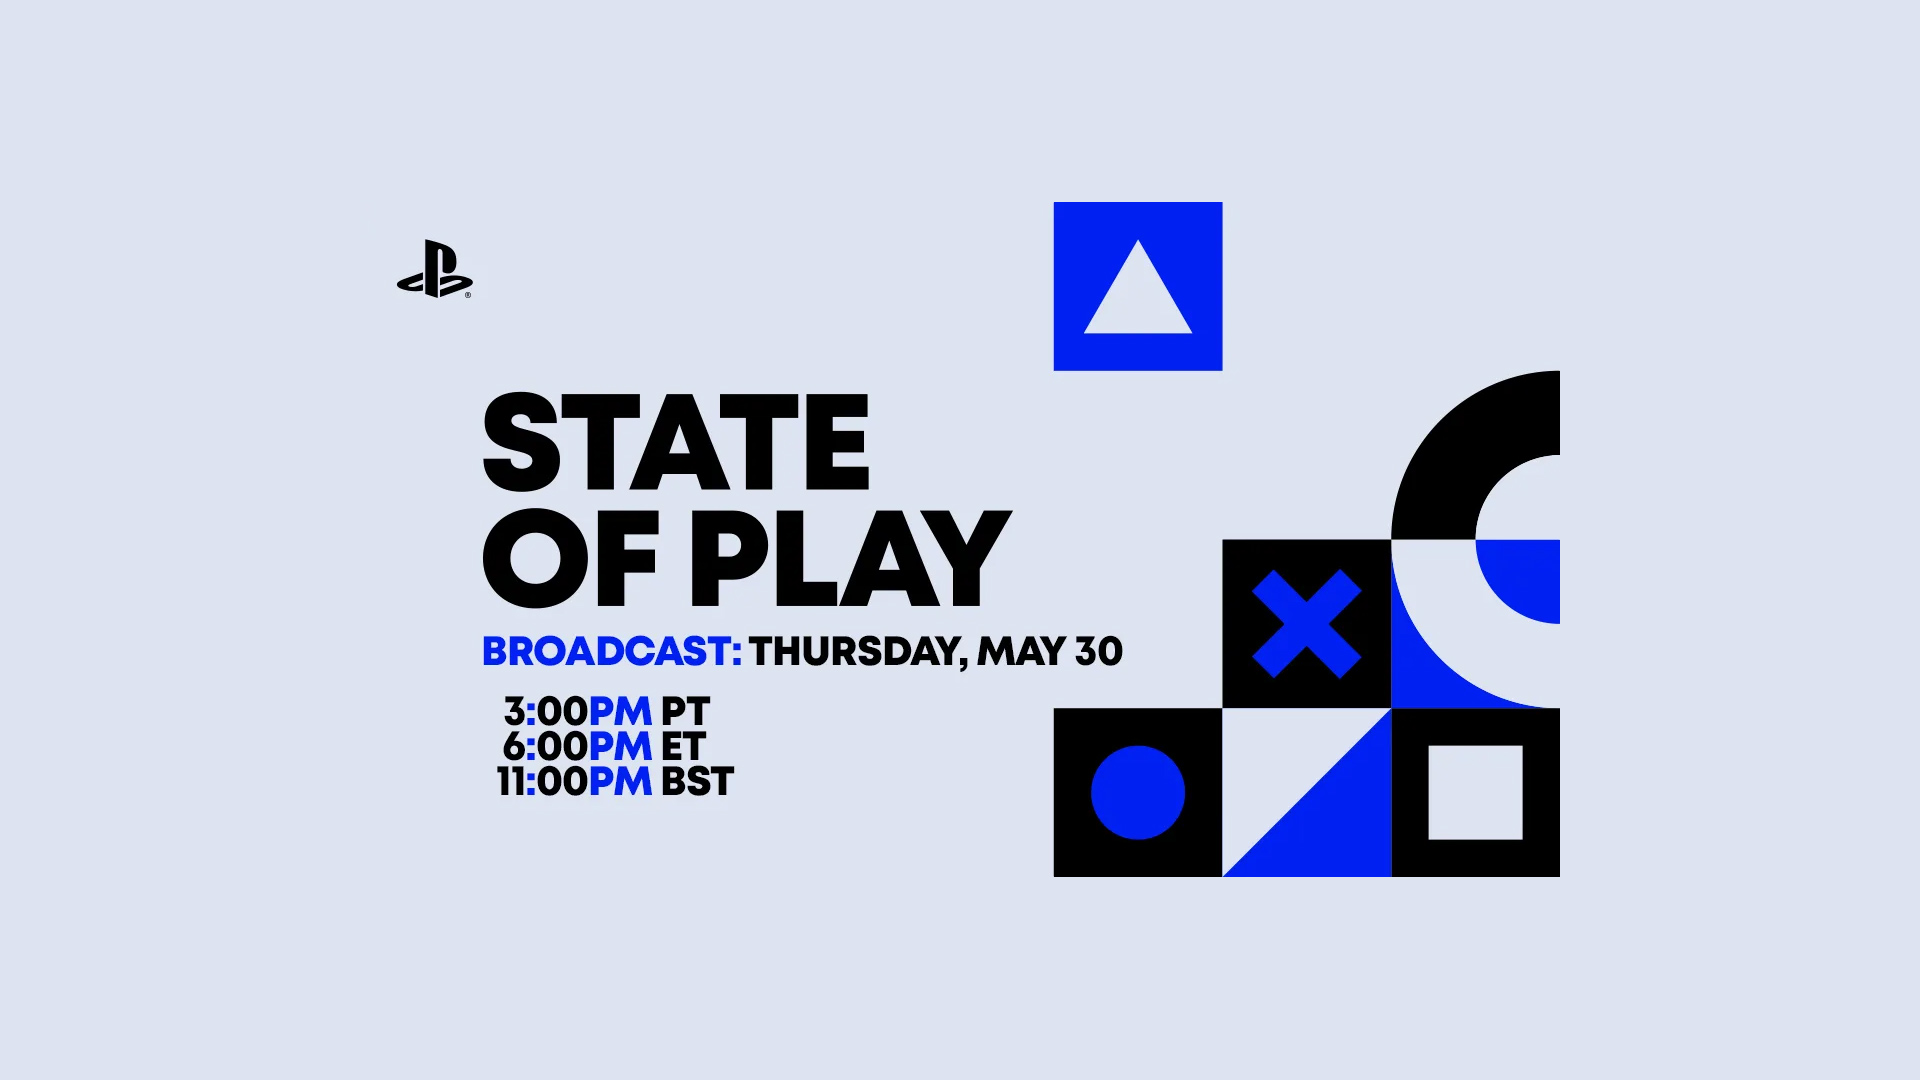 State of Play returns on May 30 at 3:00pm Pacific (6:00pm Eastern)